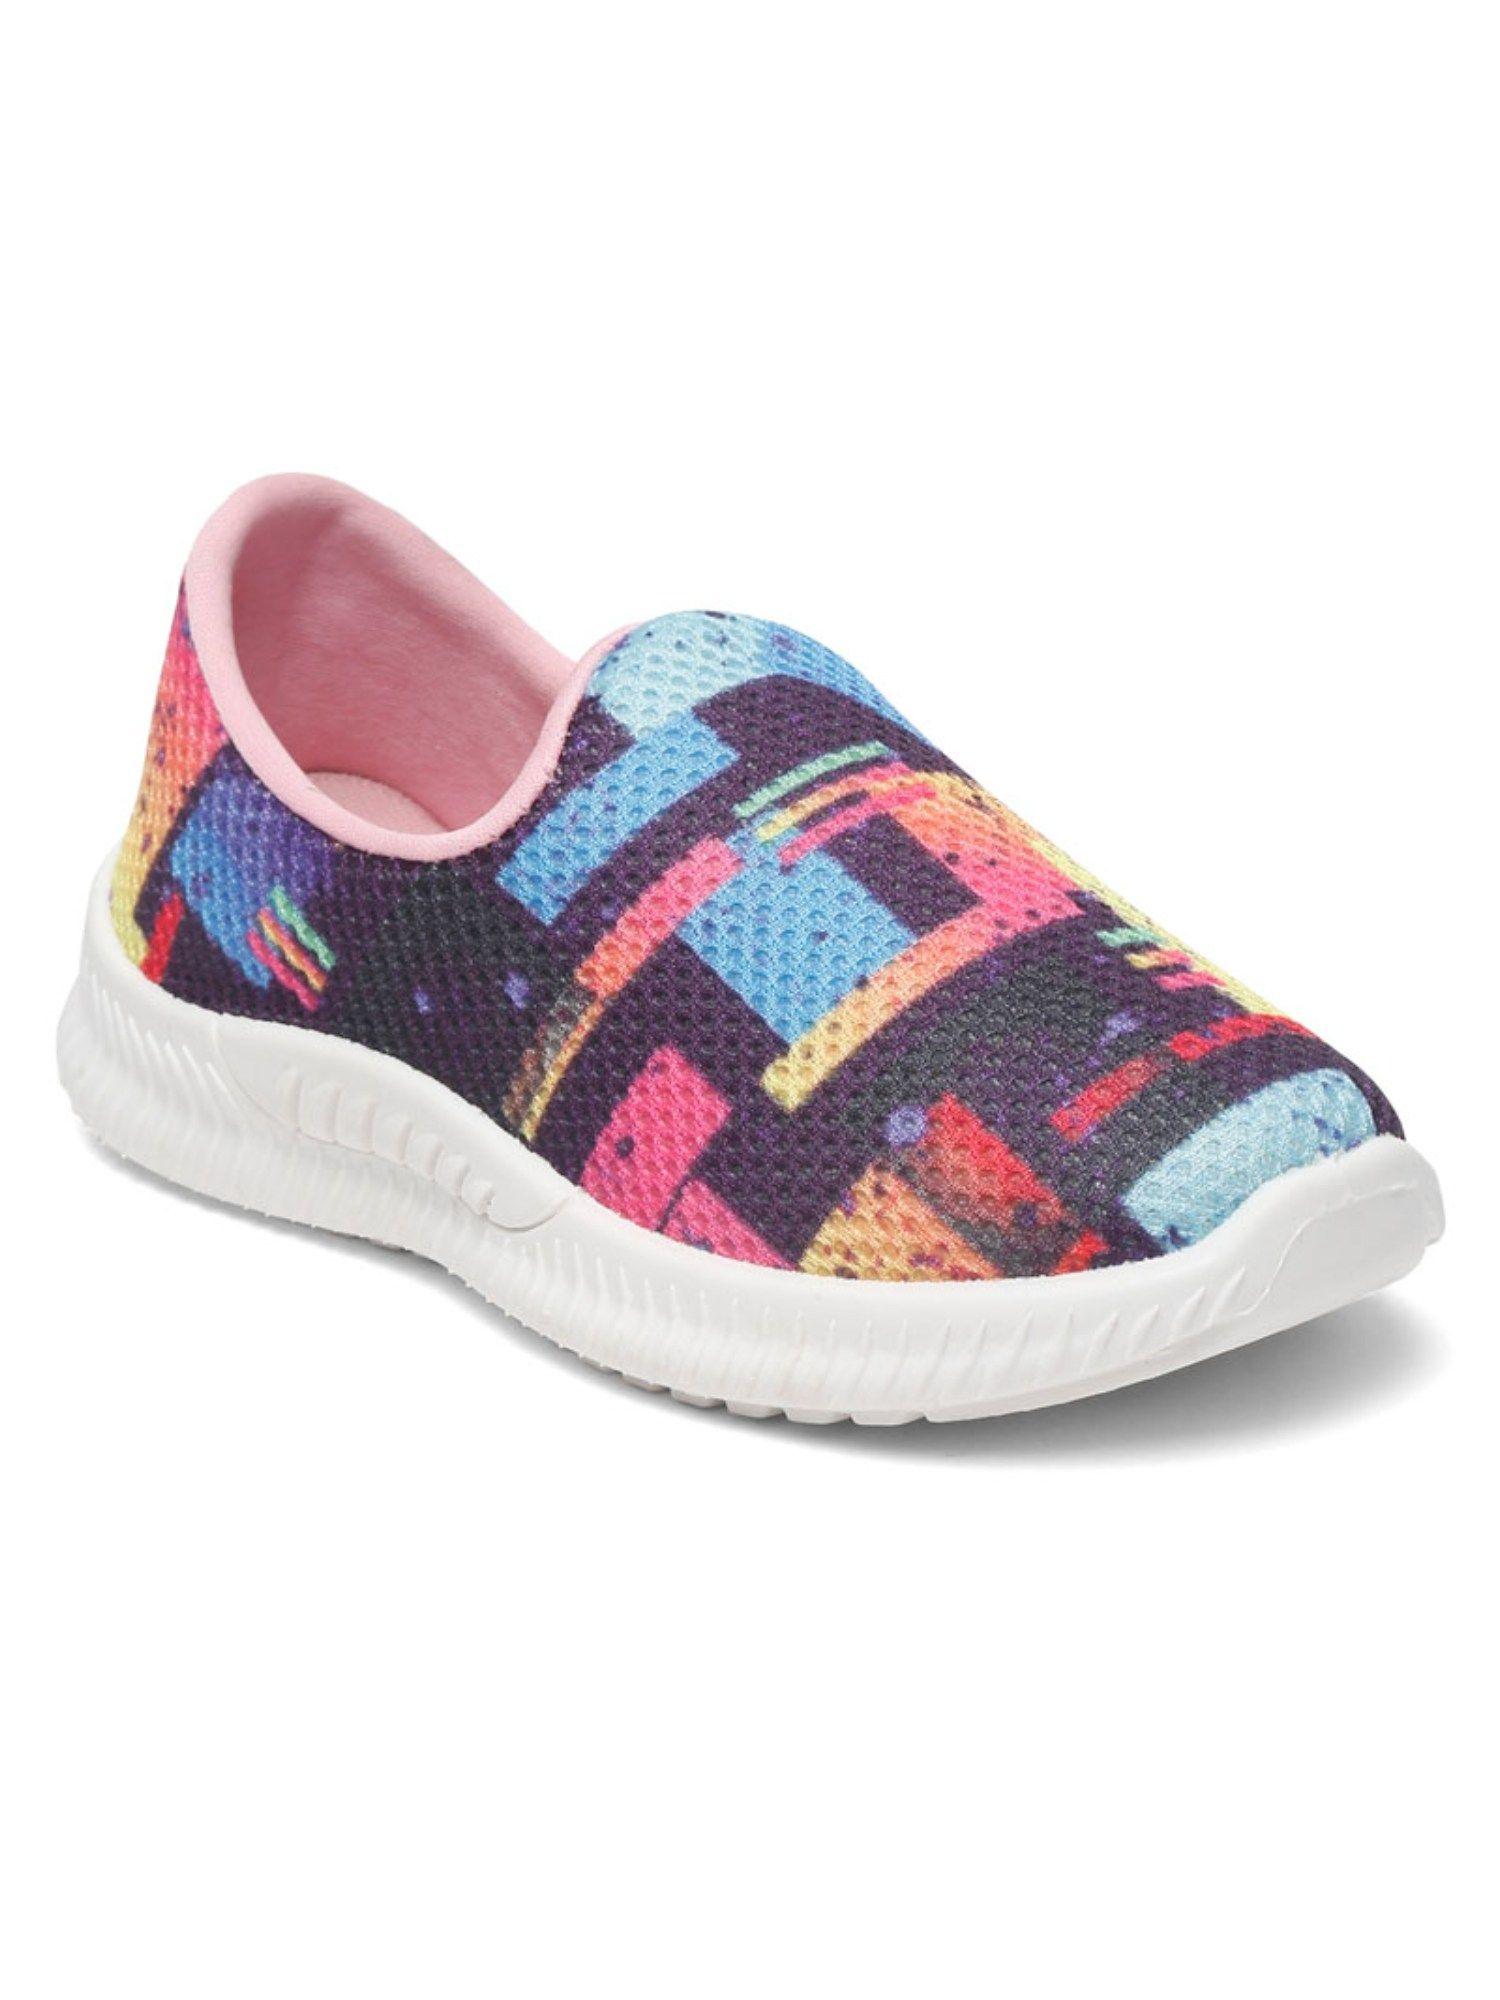 kids multi-color printed casual shoes